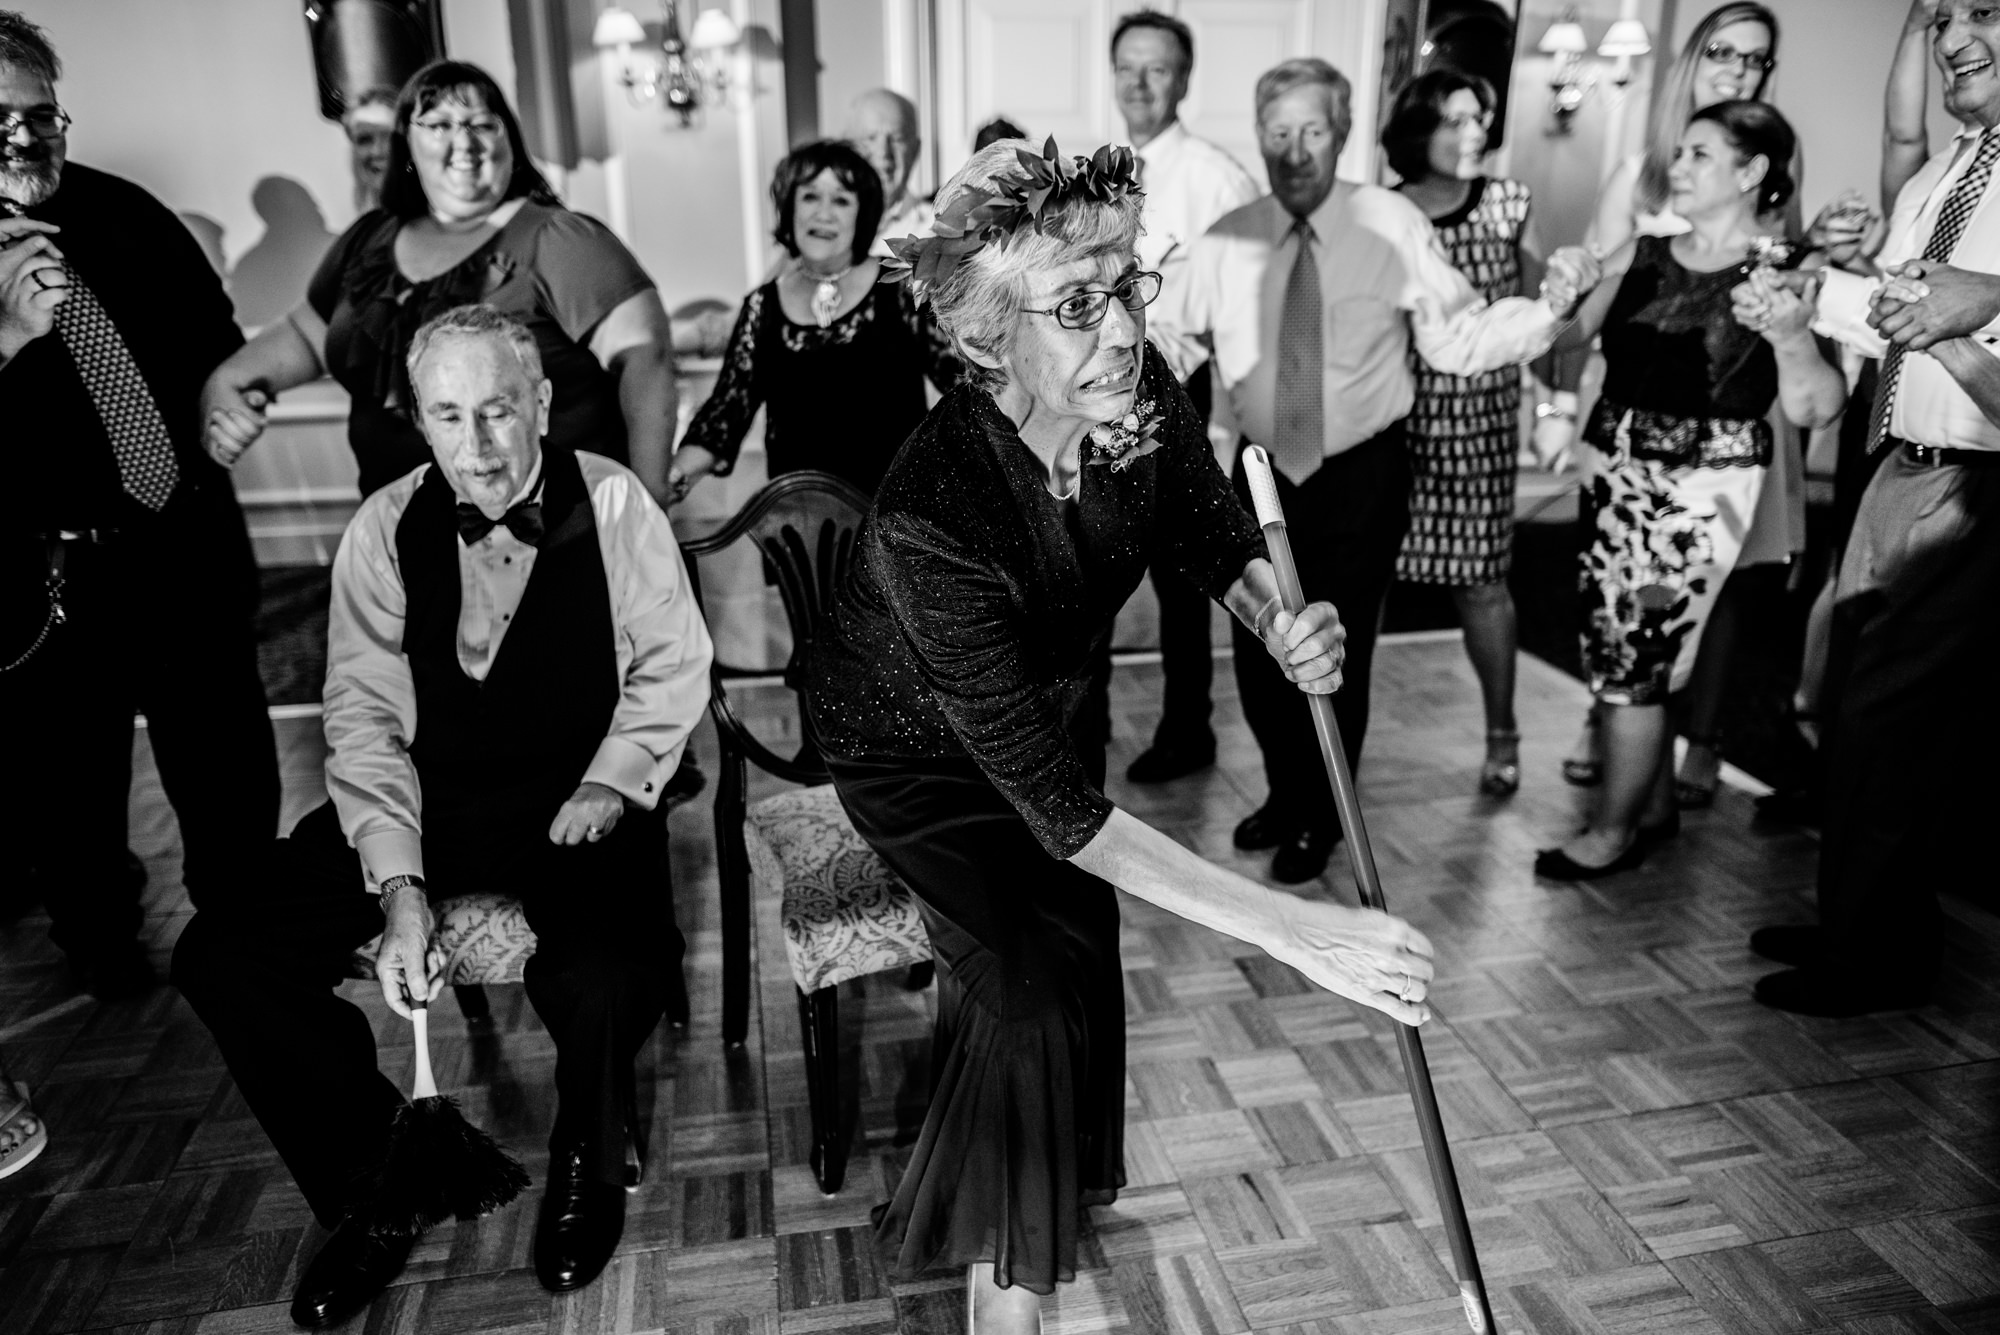 The Mizinke Dance is a celebratory Jewish tradition signifying that the youngest of the family has been married off, performed by Joelle's parents. Seattle Tennis Club. Summer 2016. Photo by Seattle Wedding Photographers Jennifer Tai Photo Artistry.